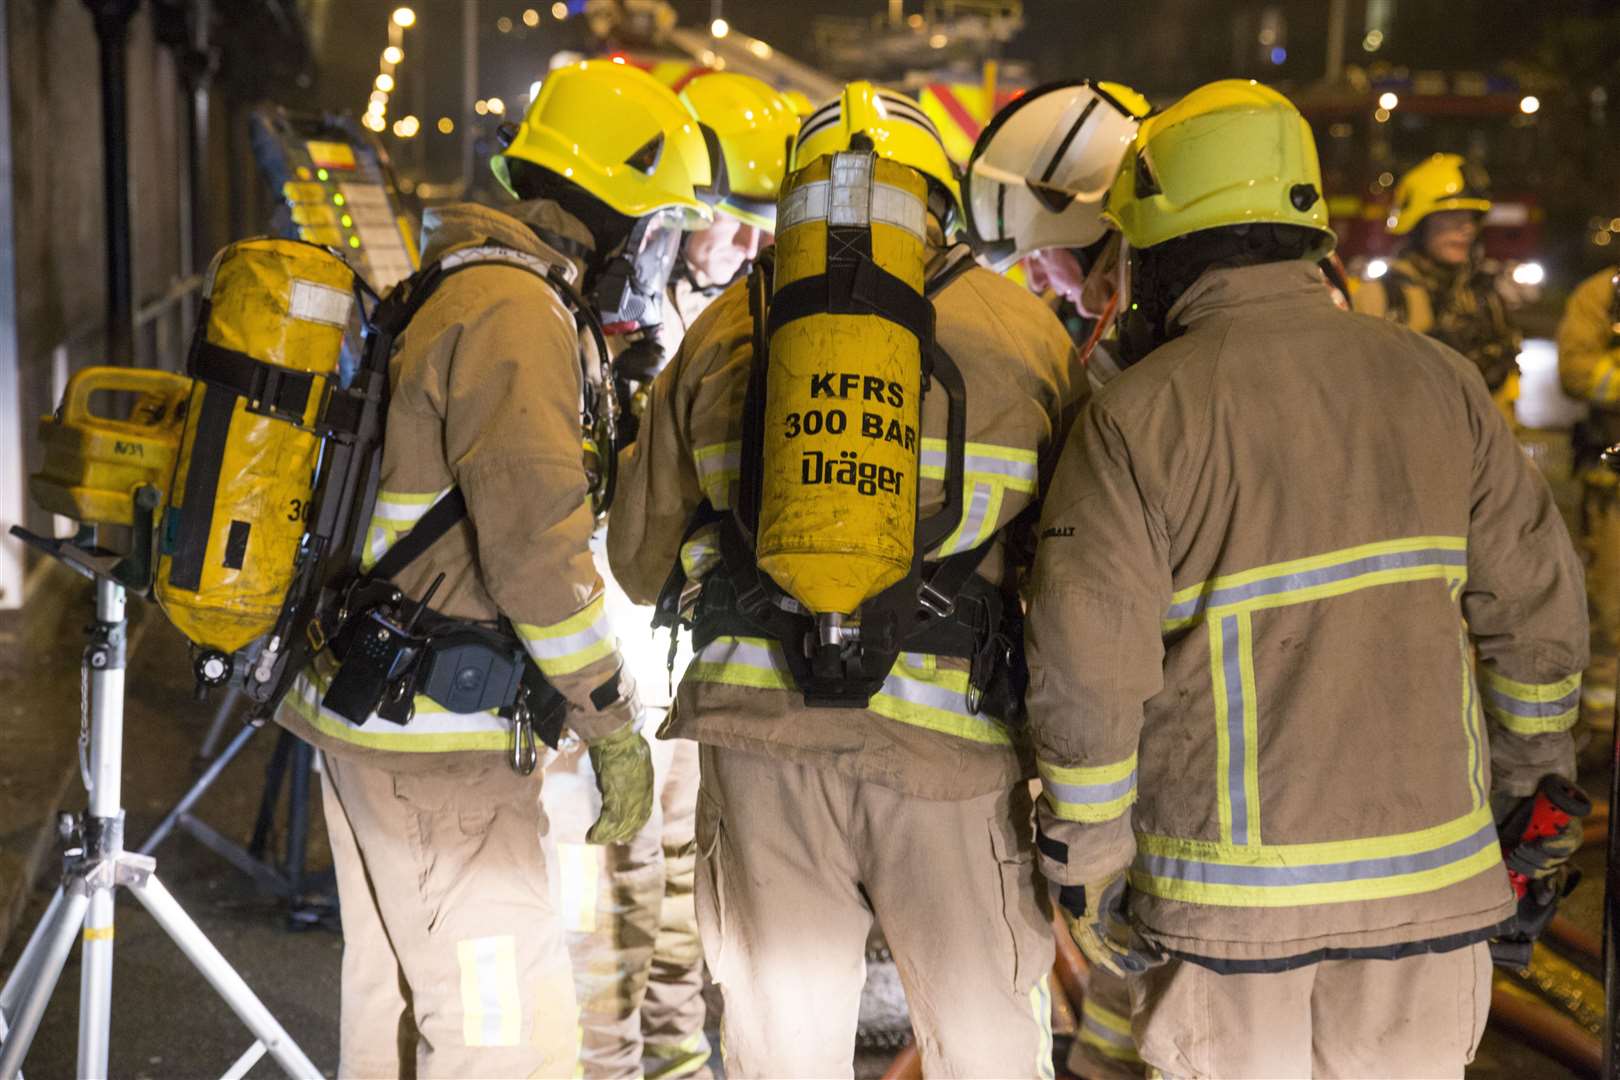 Firefighters were called to the blaze. Library image: KFRS